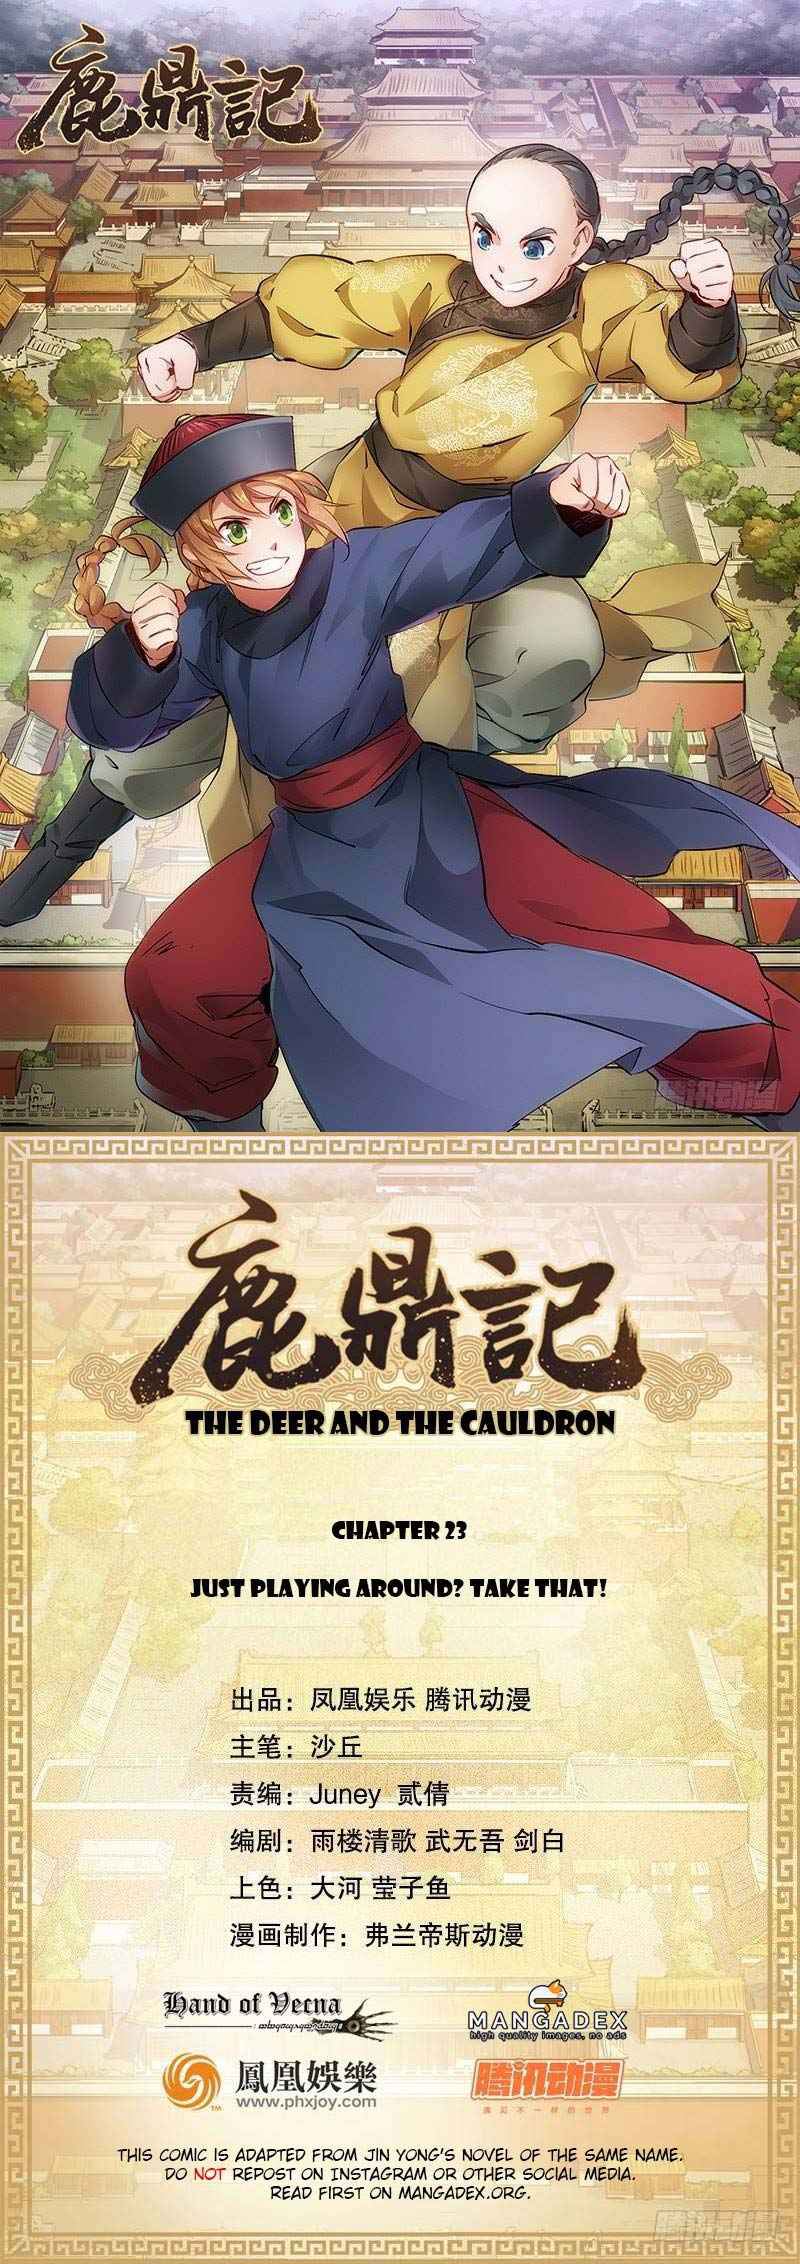 The Deer and the Cauldro Chapter 23 2